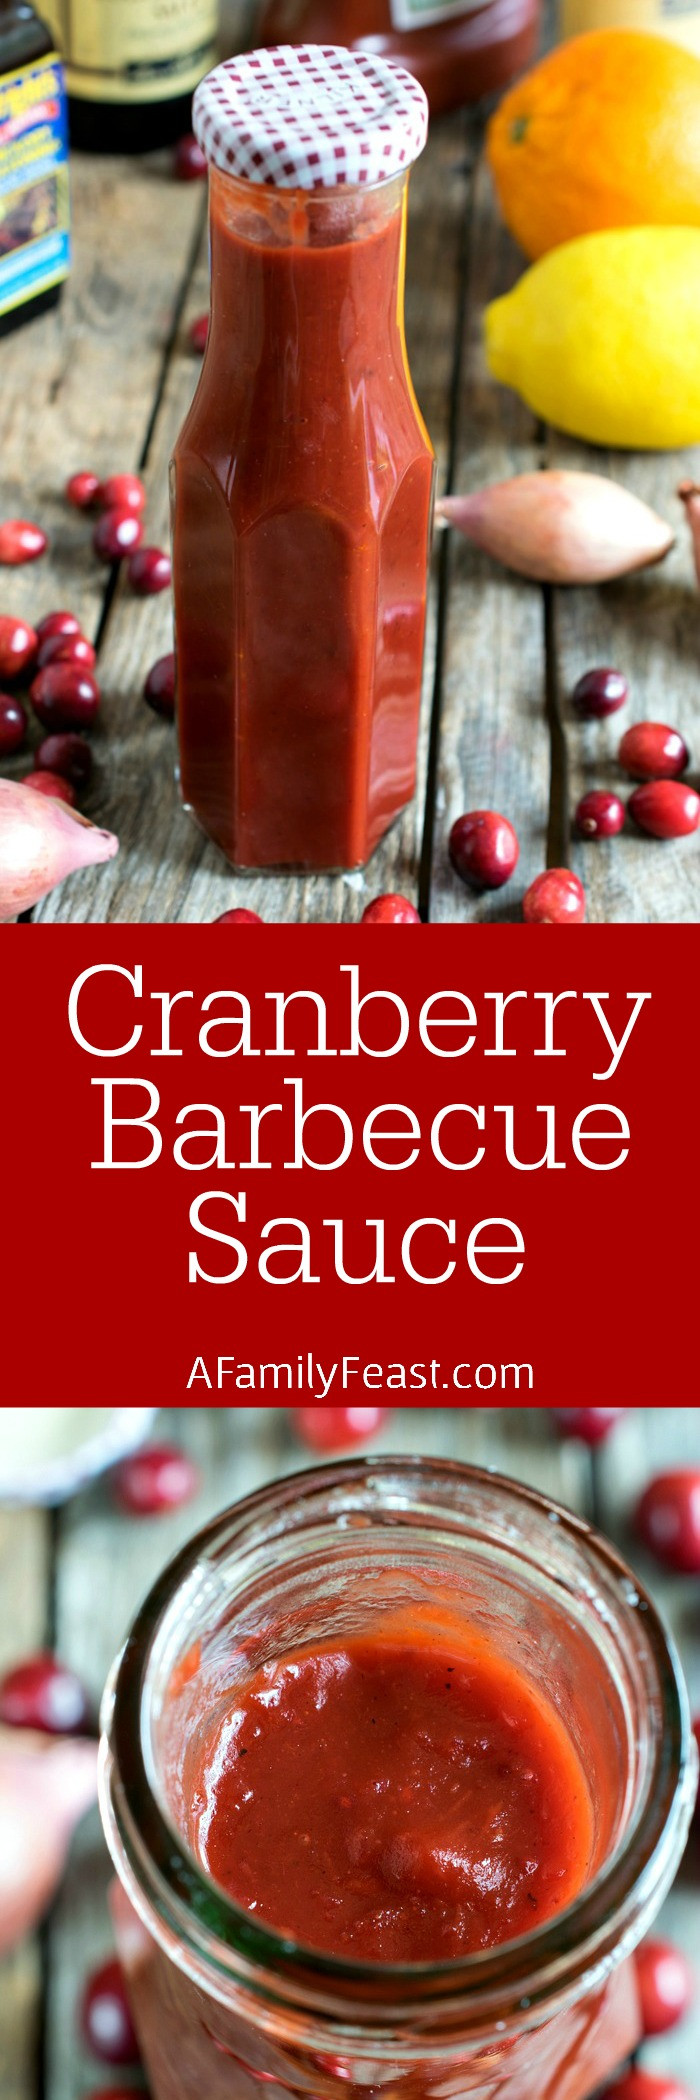 Cranberry Bbq Sauce
 Cranberry Barbecue Sauce A Family Feast